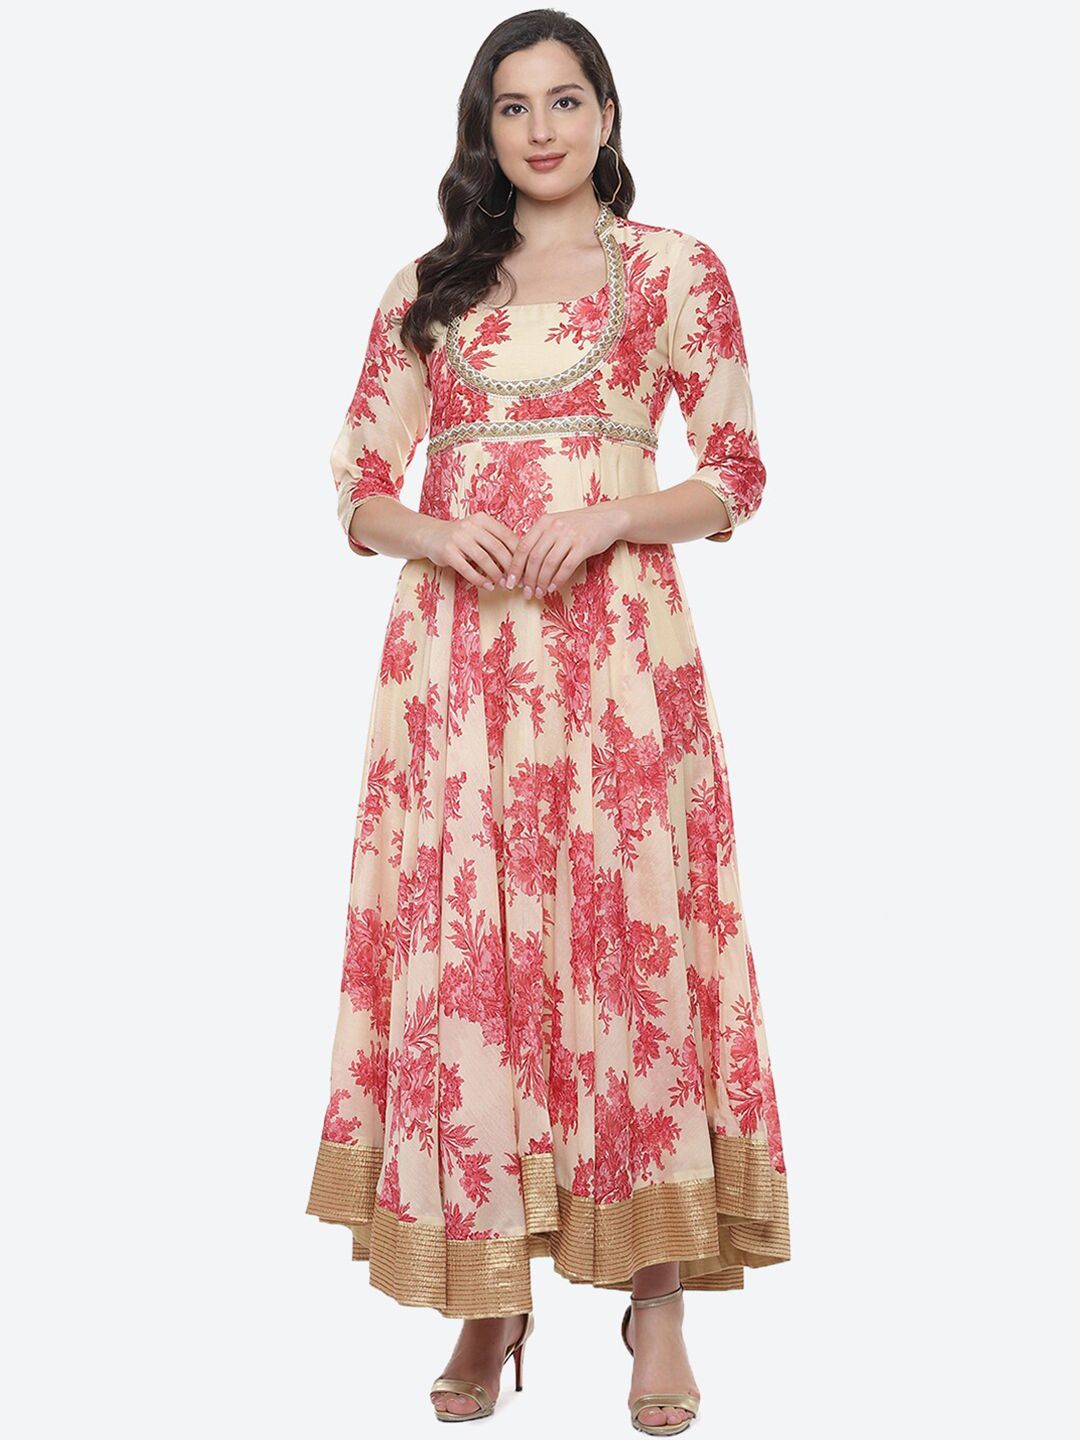 Biba Beige & Red Floral Ethnic Maxi Dress Price in India